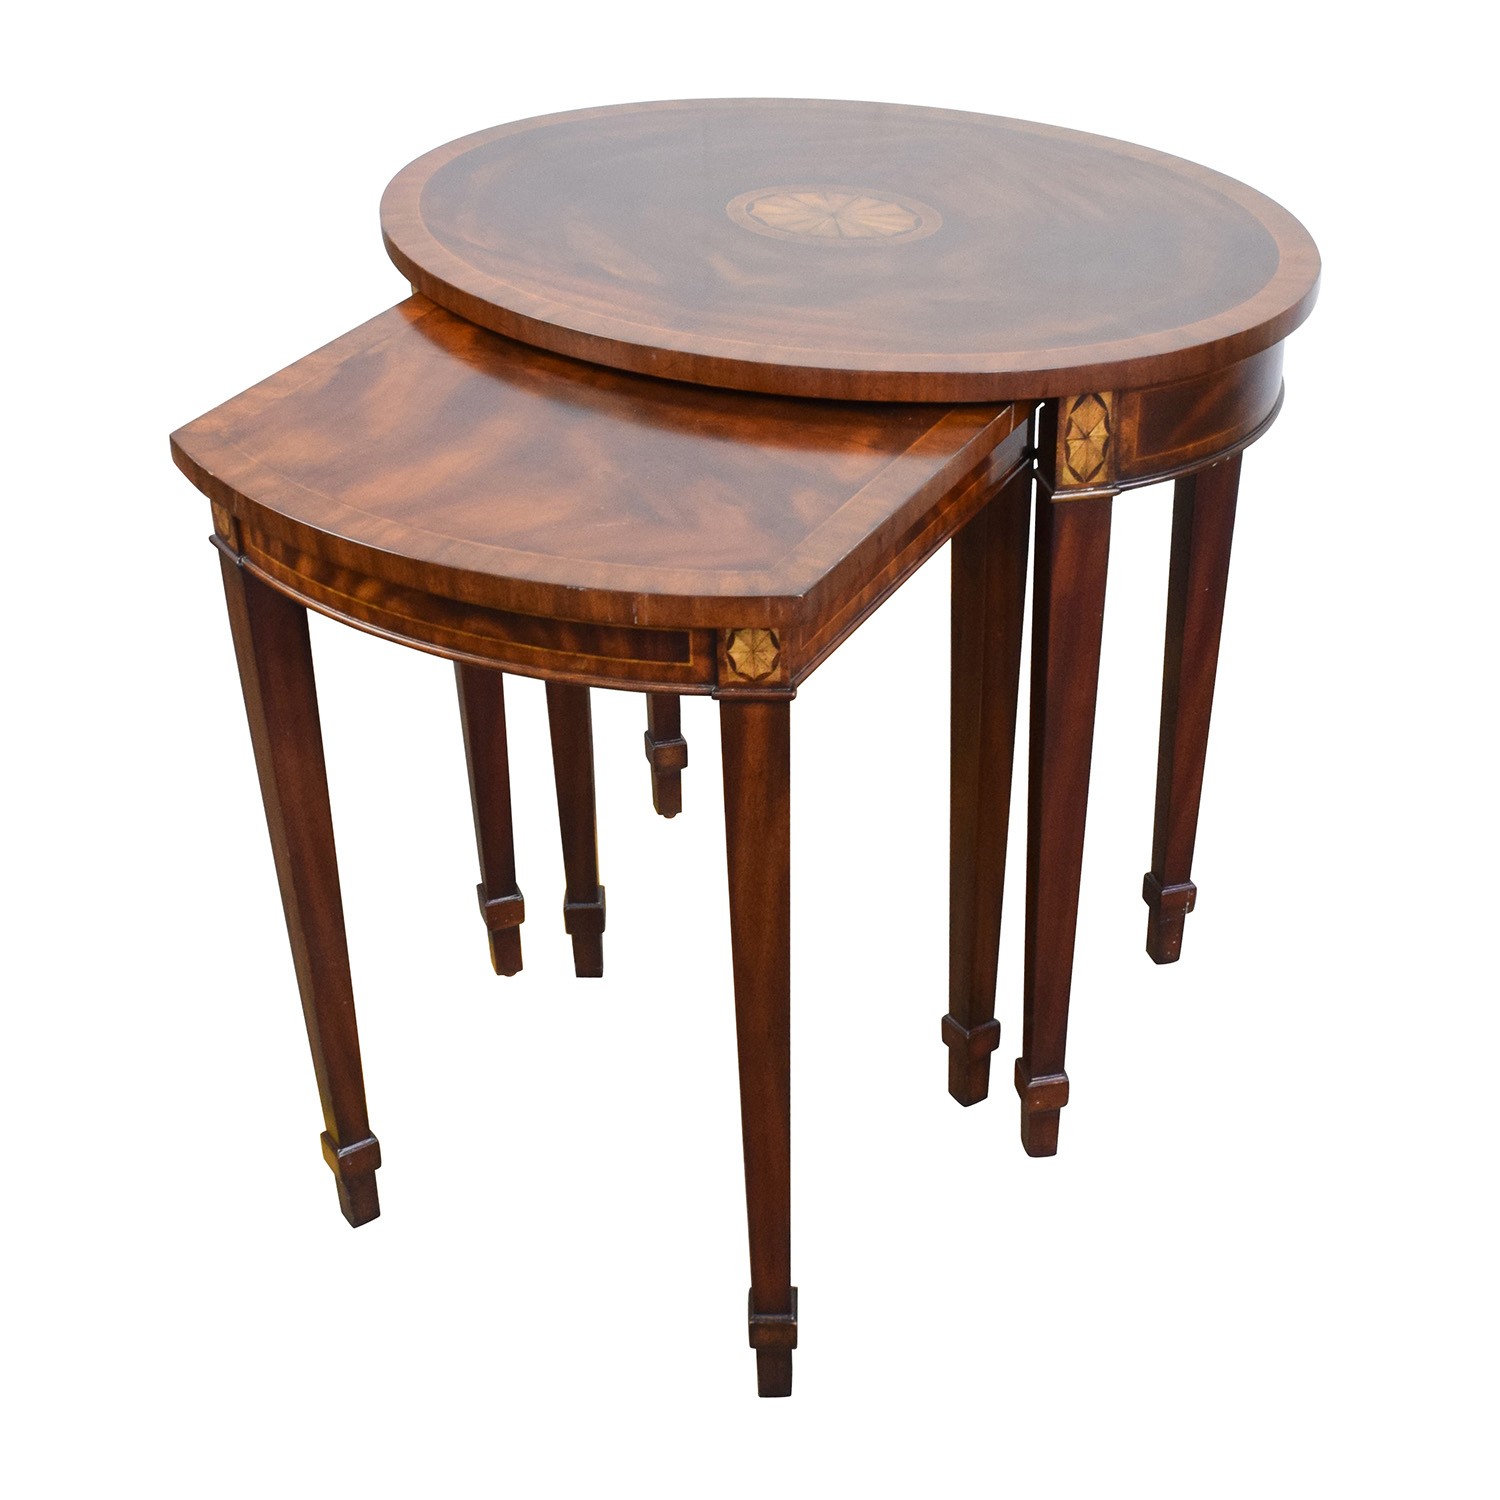 43 off antique reproduction wood nesting side tables